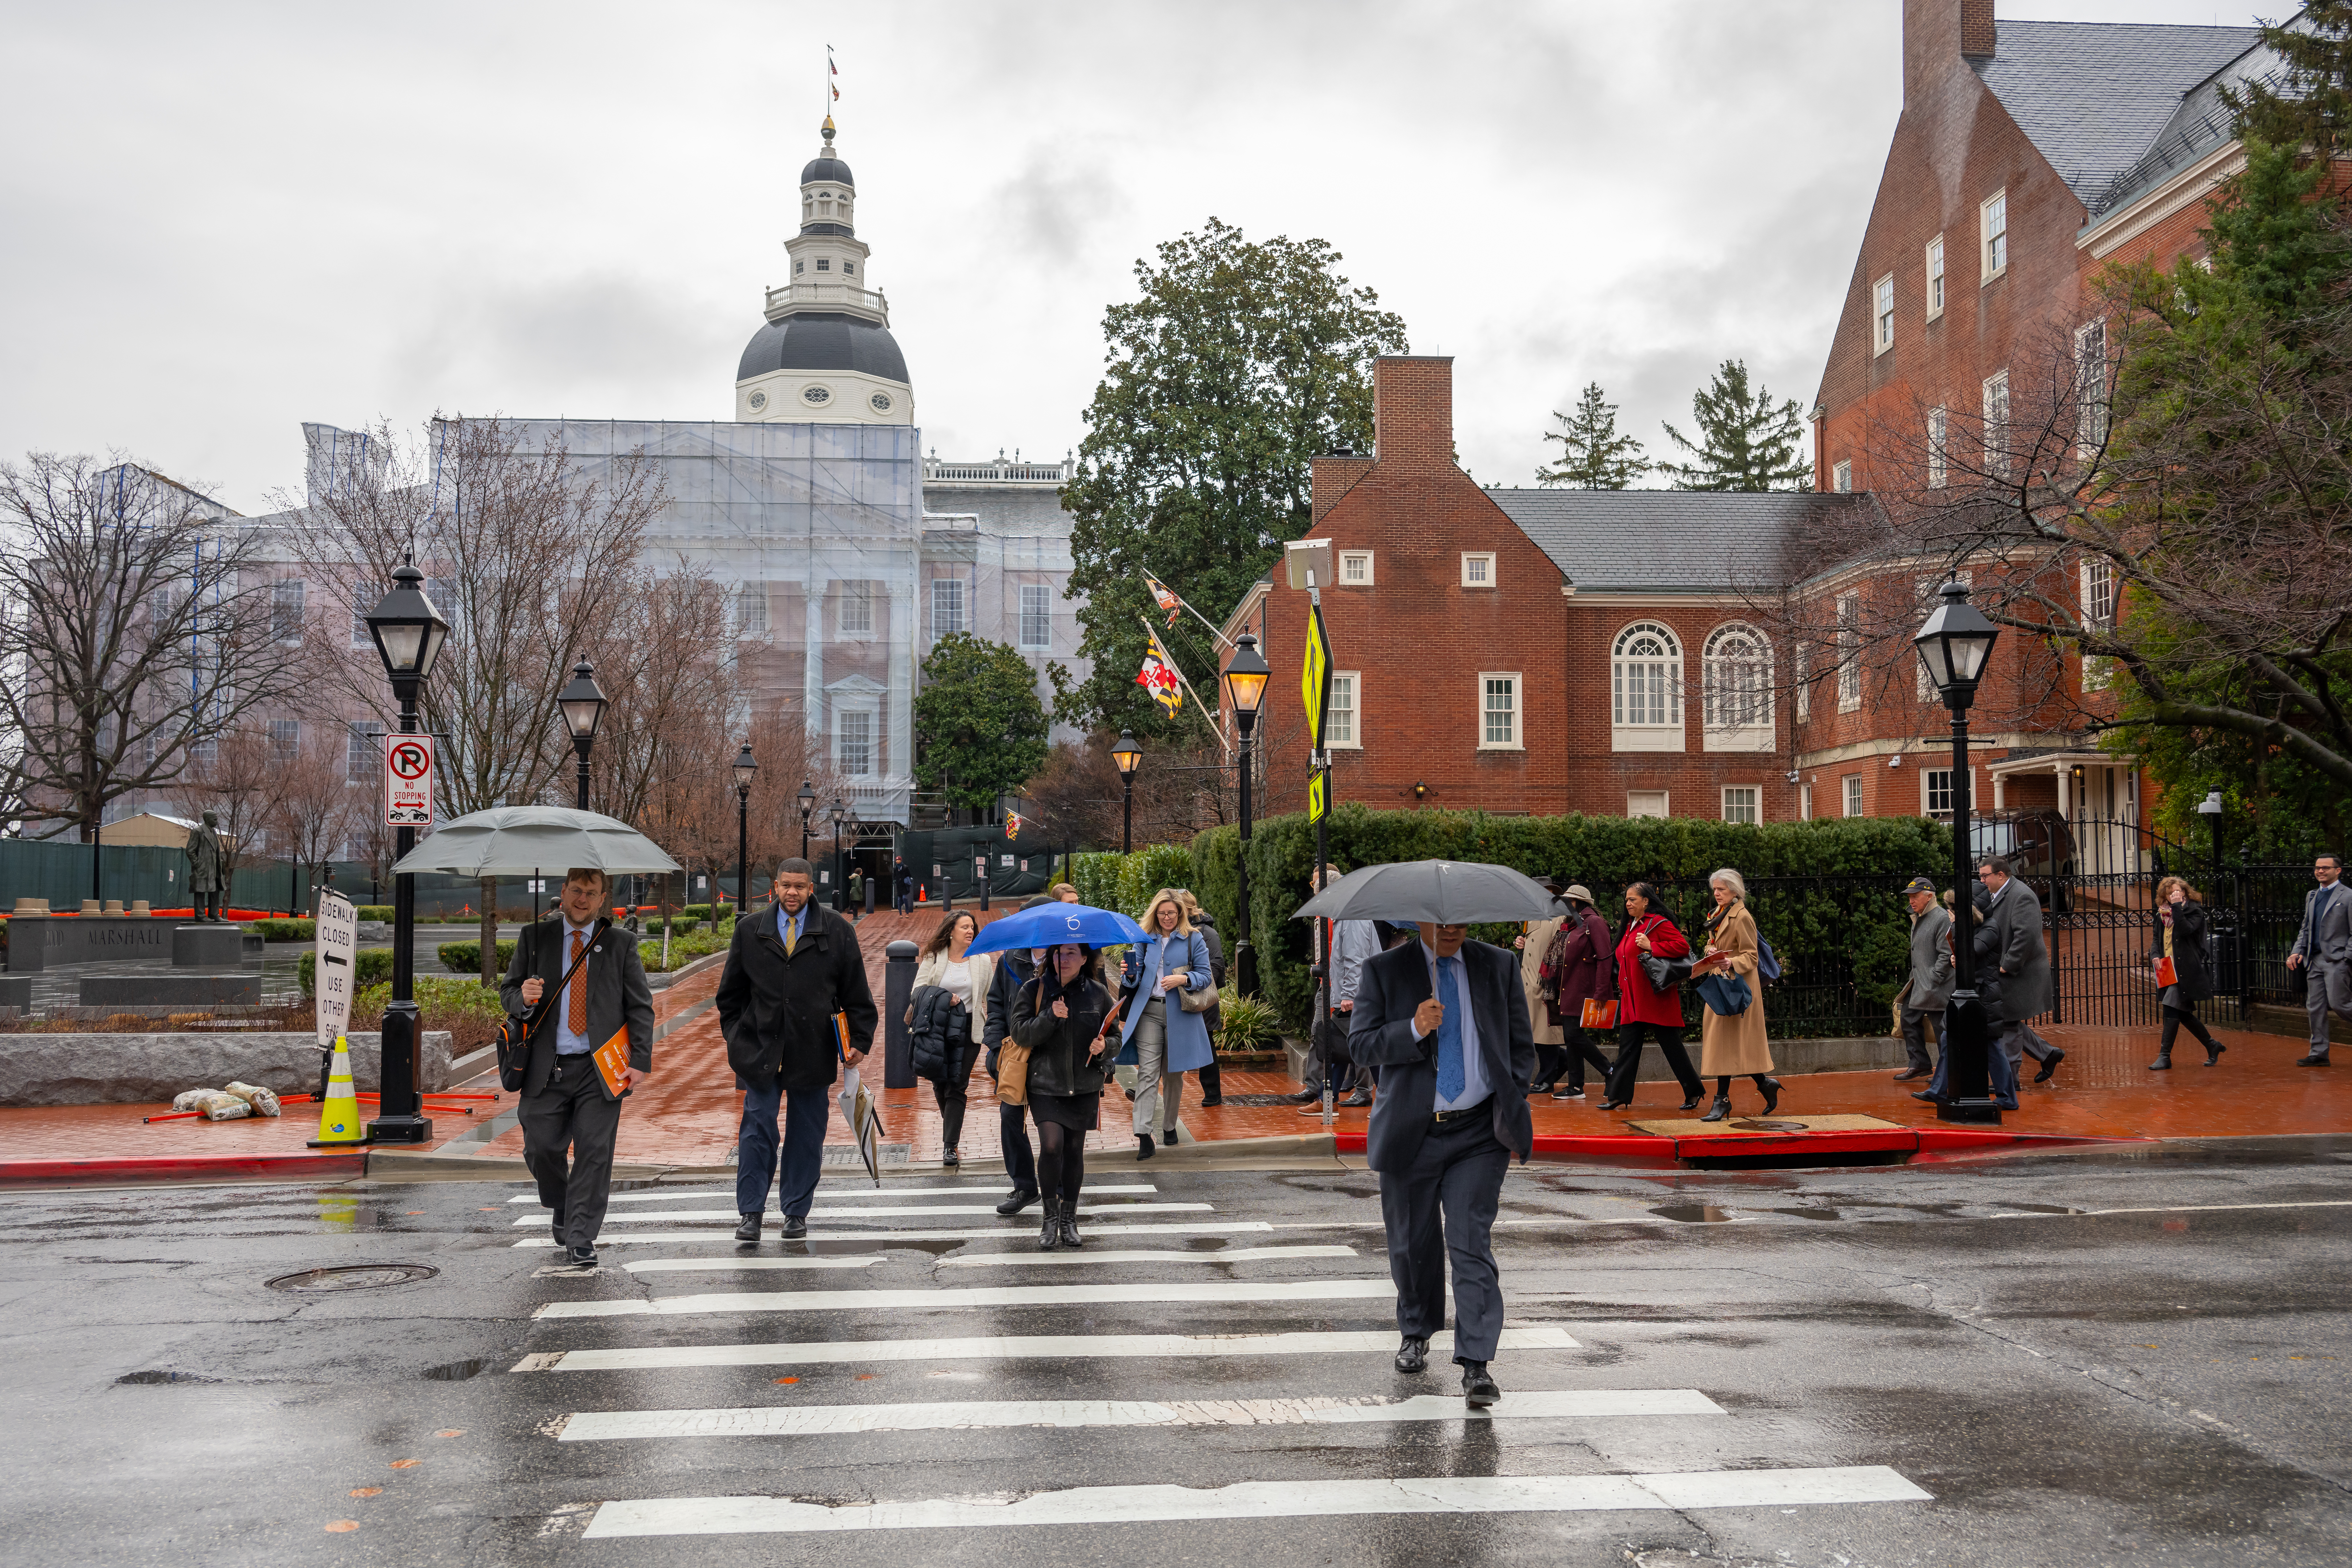 MSBA members walk down the street in front of the Maryland State House in Annapolis on a rainy day.